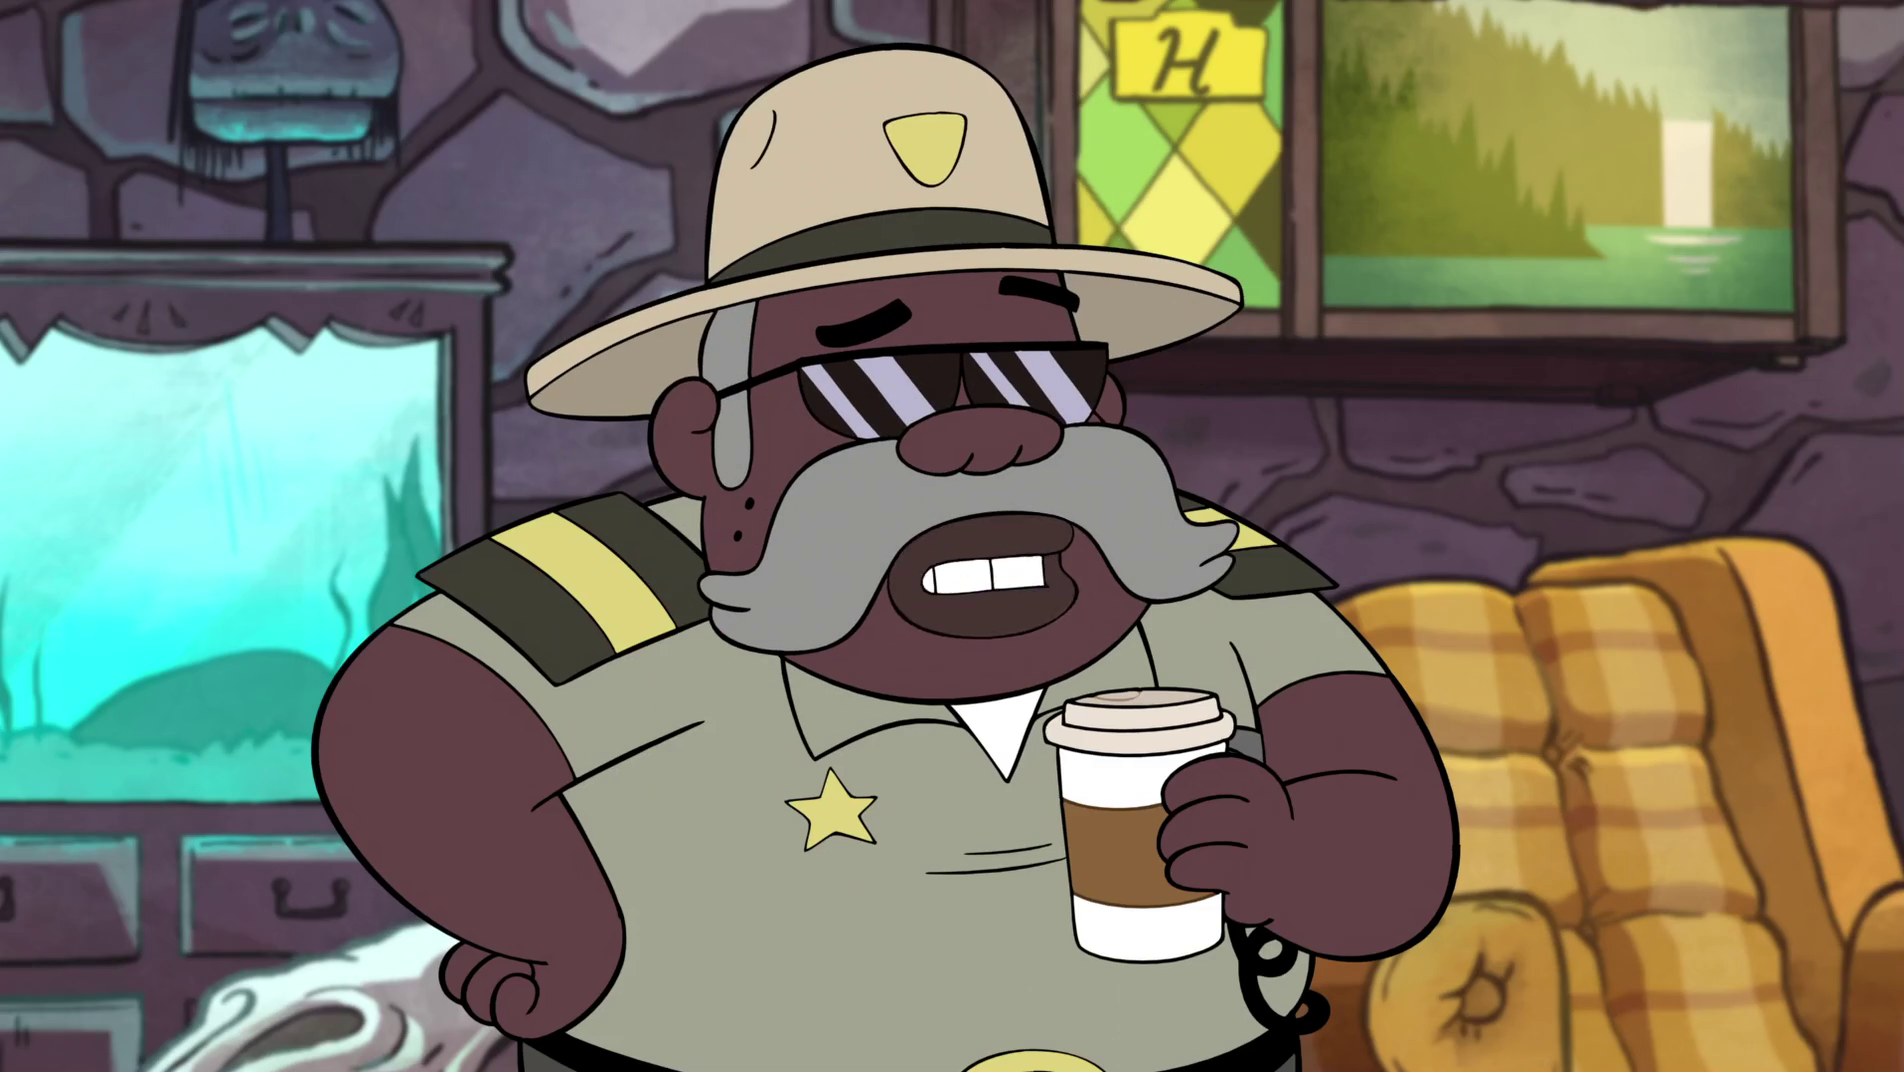 https://vignette.wikia.nocookie.net/gravityfalls/images/3/37/S1e3_Sheriff_Blubs_First_Appearance.png/revision/latest?cb=20160204034446